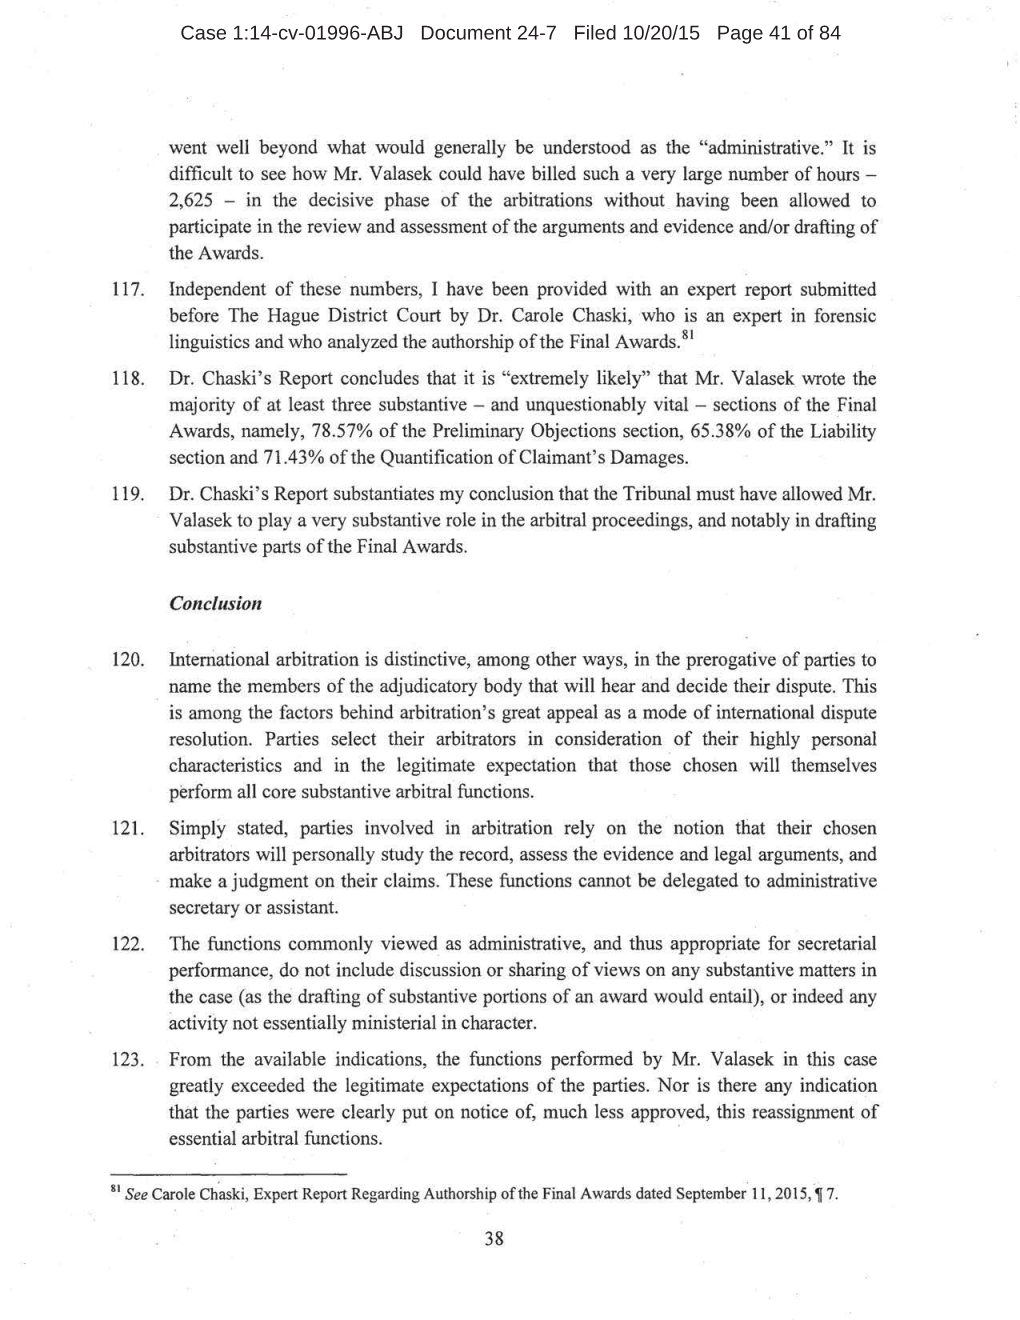 Case 1:14-Cv-01996-ABJ Document 24-7 Filed 10/20/15 Page 41 of 84